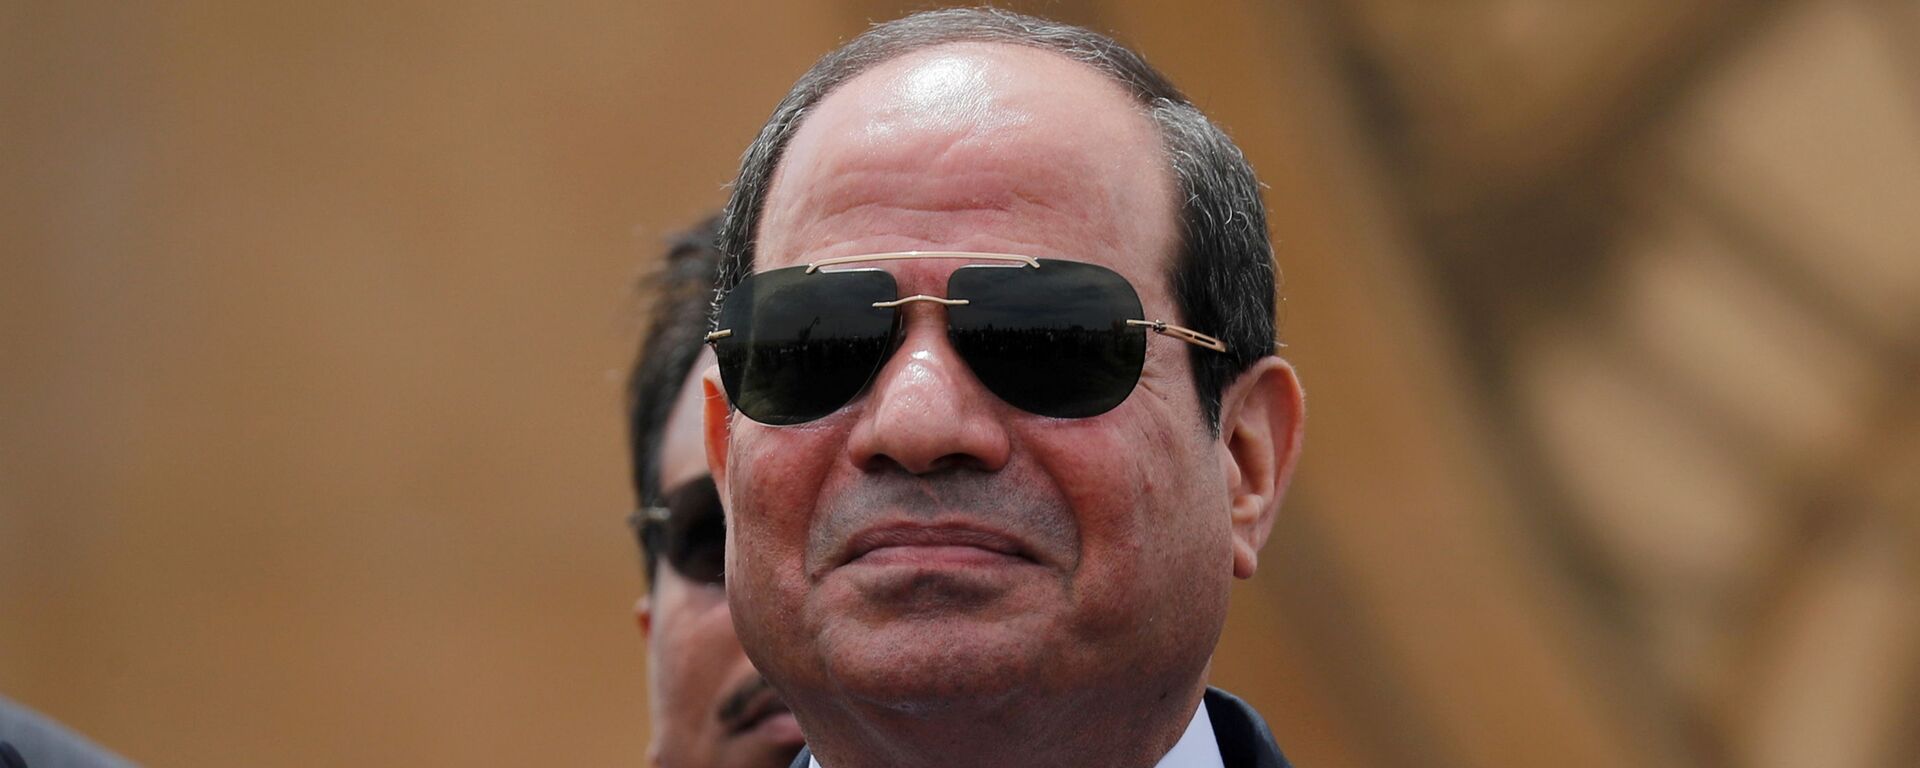 Egyptian President Abdel Fattah al-Sisi attends the opening ceremony of floating bridges and tunnel projects executed under the Suez Canal in Ismailia, Egypt May 5, 2019. - Sputnik International, 1920, 27.05.2021